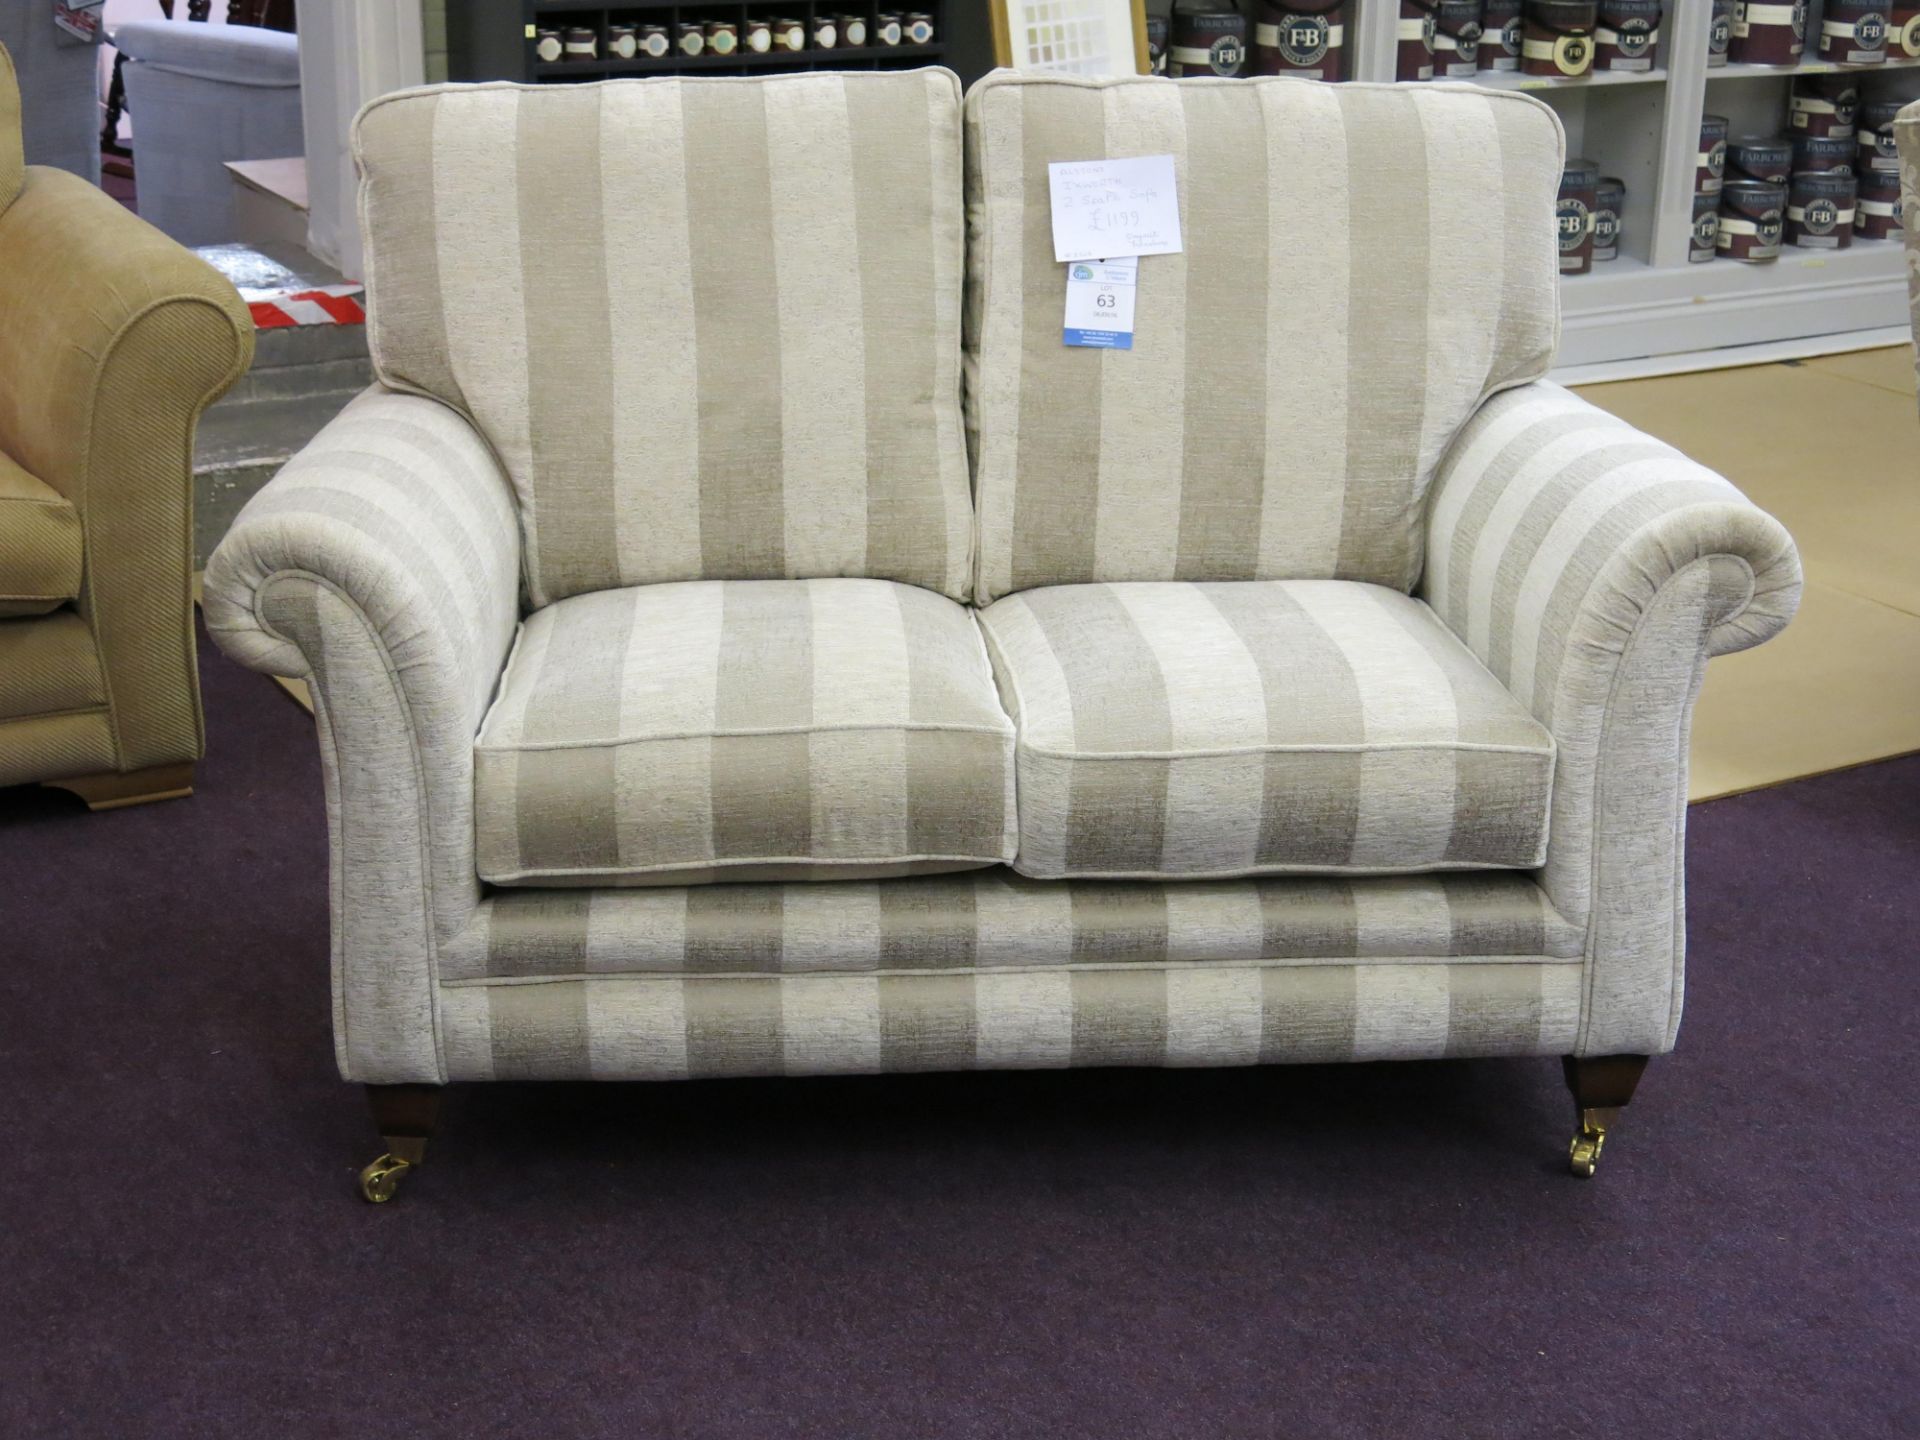 Alstons Ixworth two seat sofa with oyster stripe cover with polished brass castors on front feet.